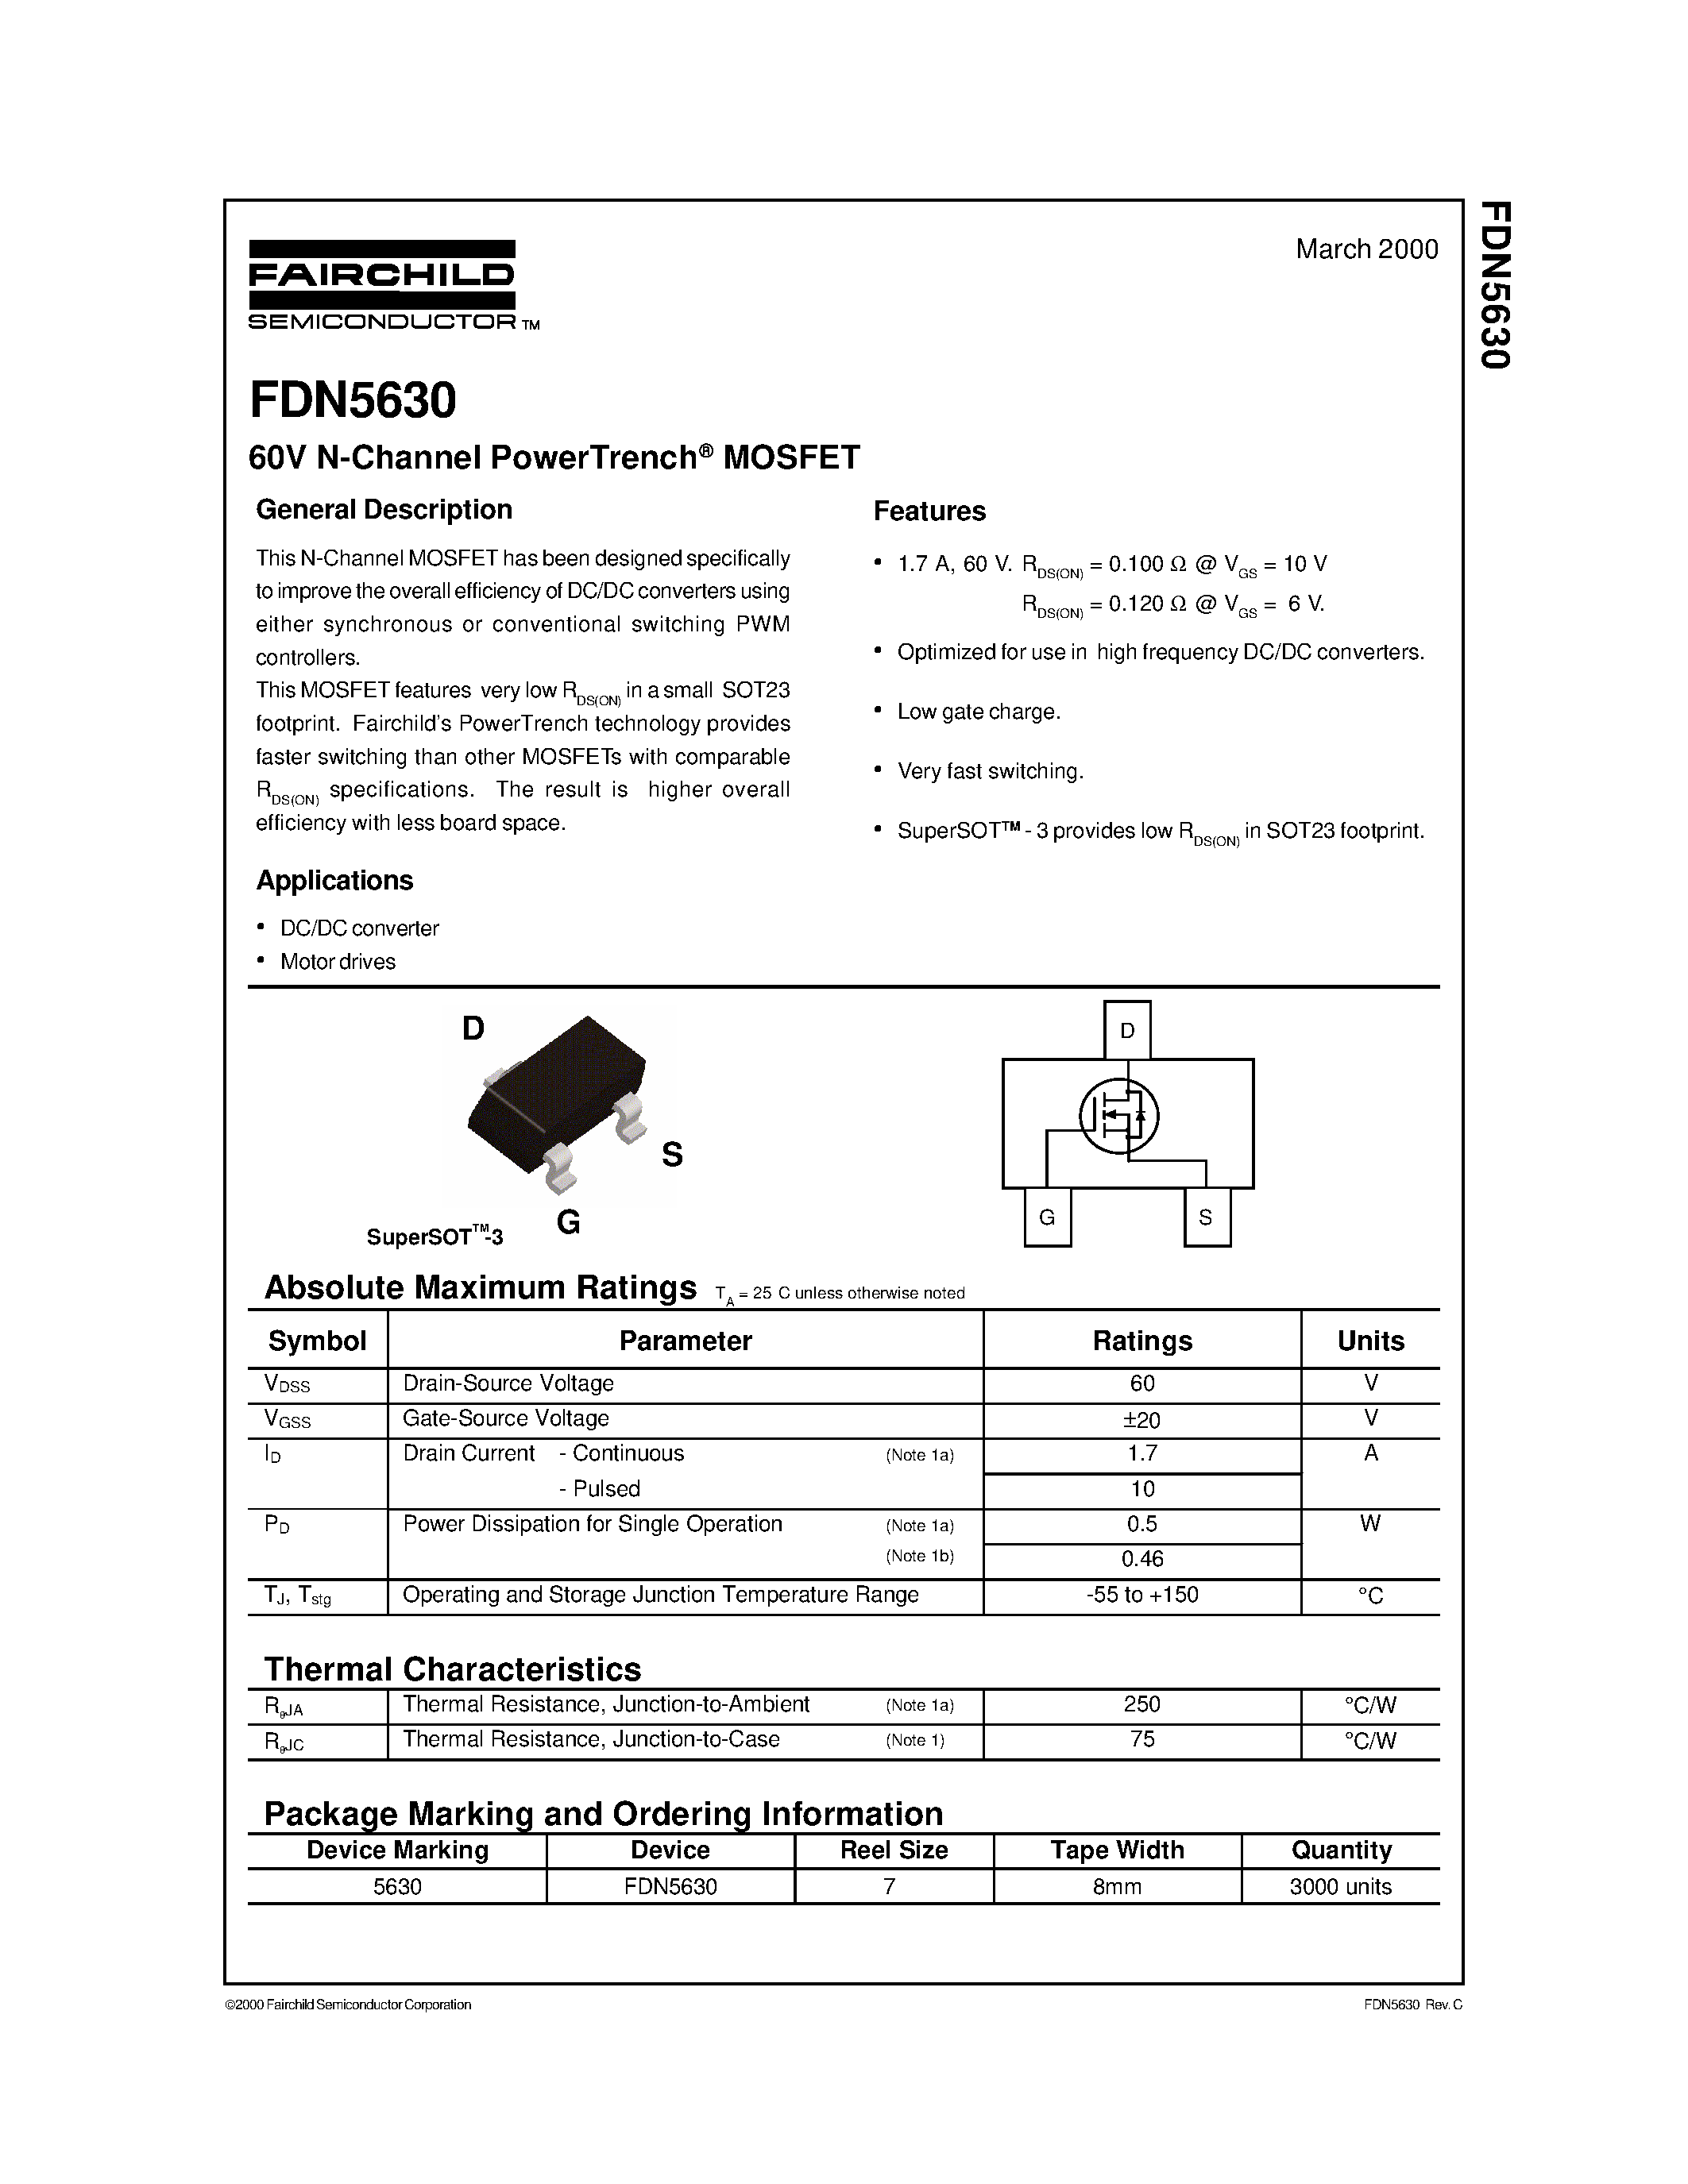 Datasheet FDN5630 - 60V N-Channel PowerTrench MOSFET page 1